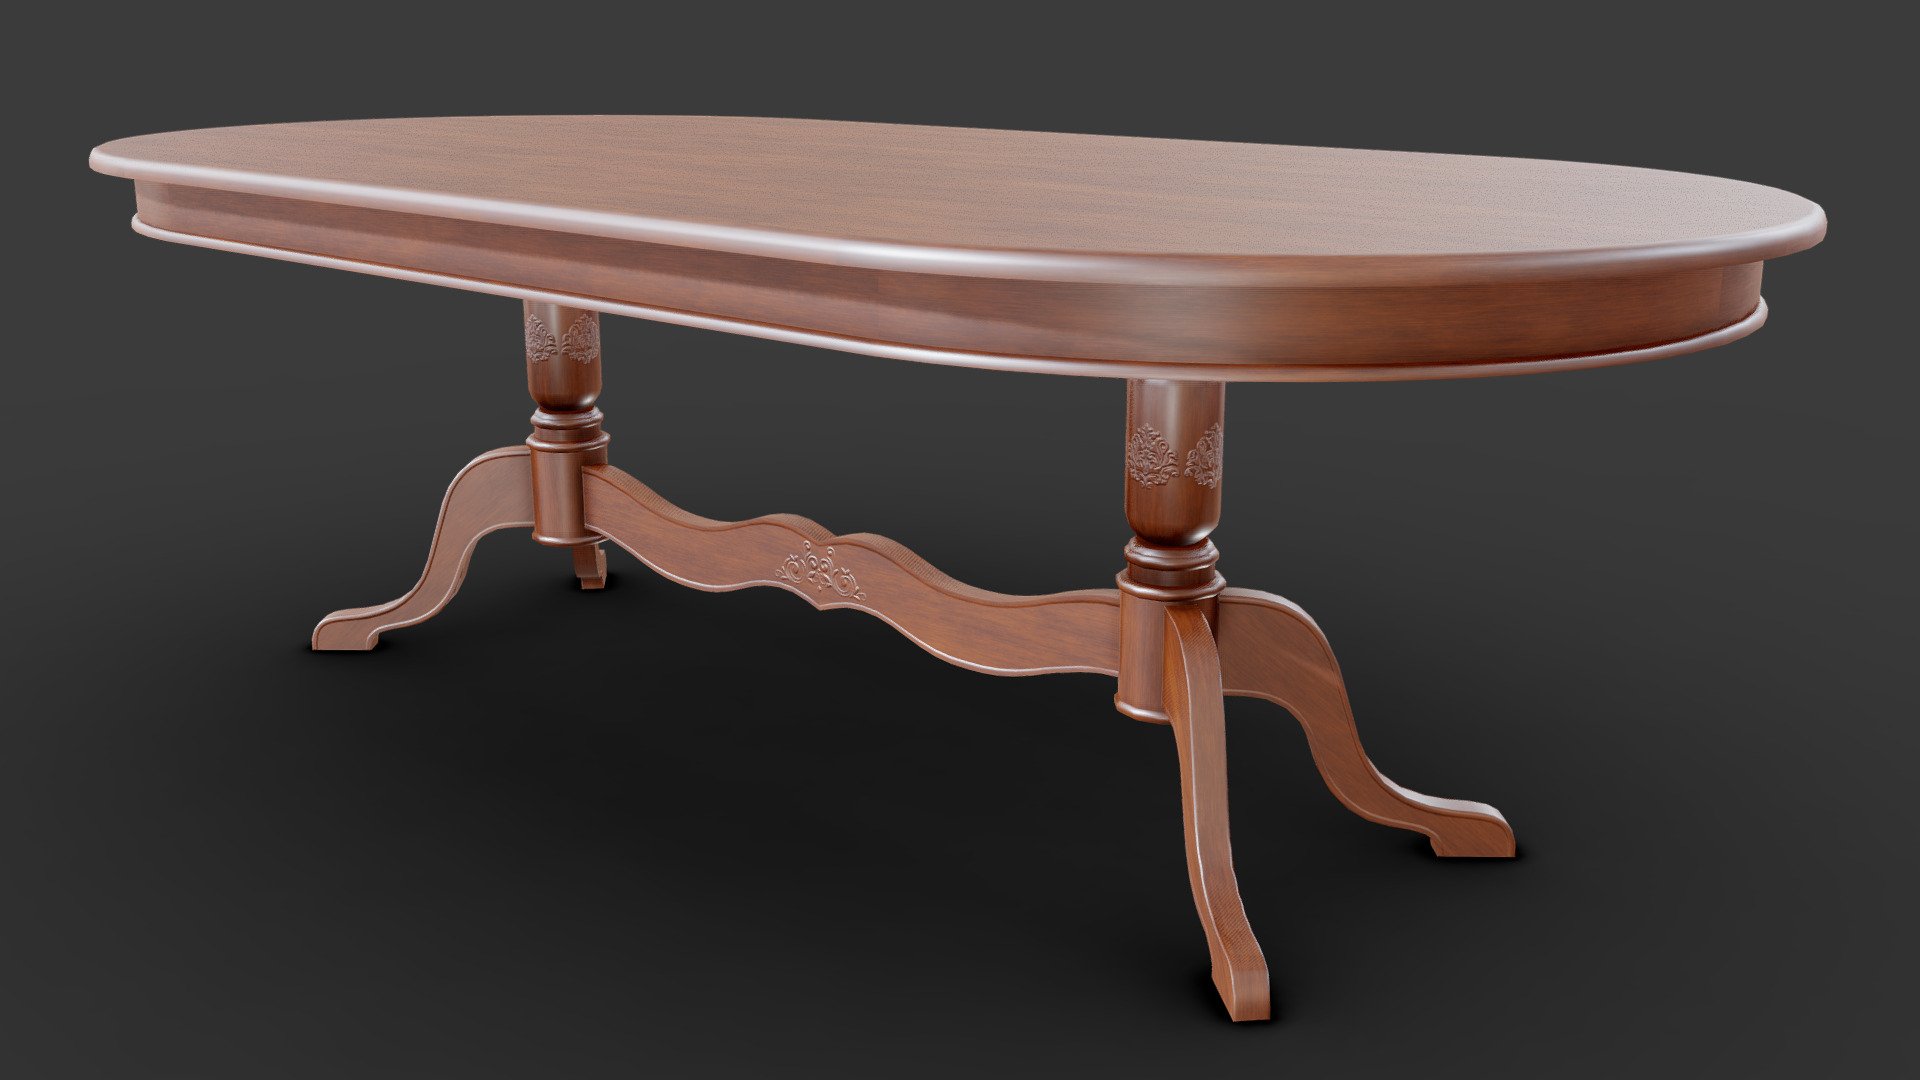 An antique Victorian era dining table made out of mahogany with carved embellishments.

Modeled in Blender, normal map bake in Painter.

The model has a separate lightmap UV channel 3d model